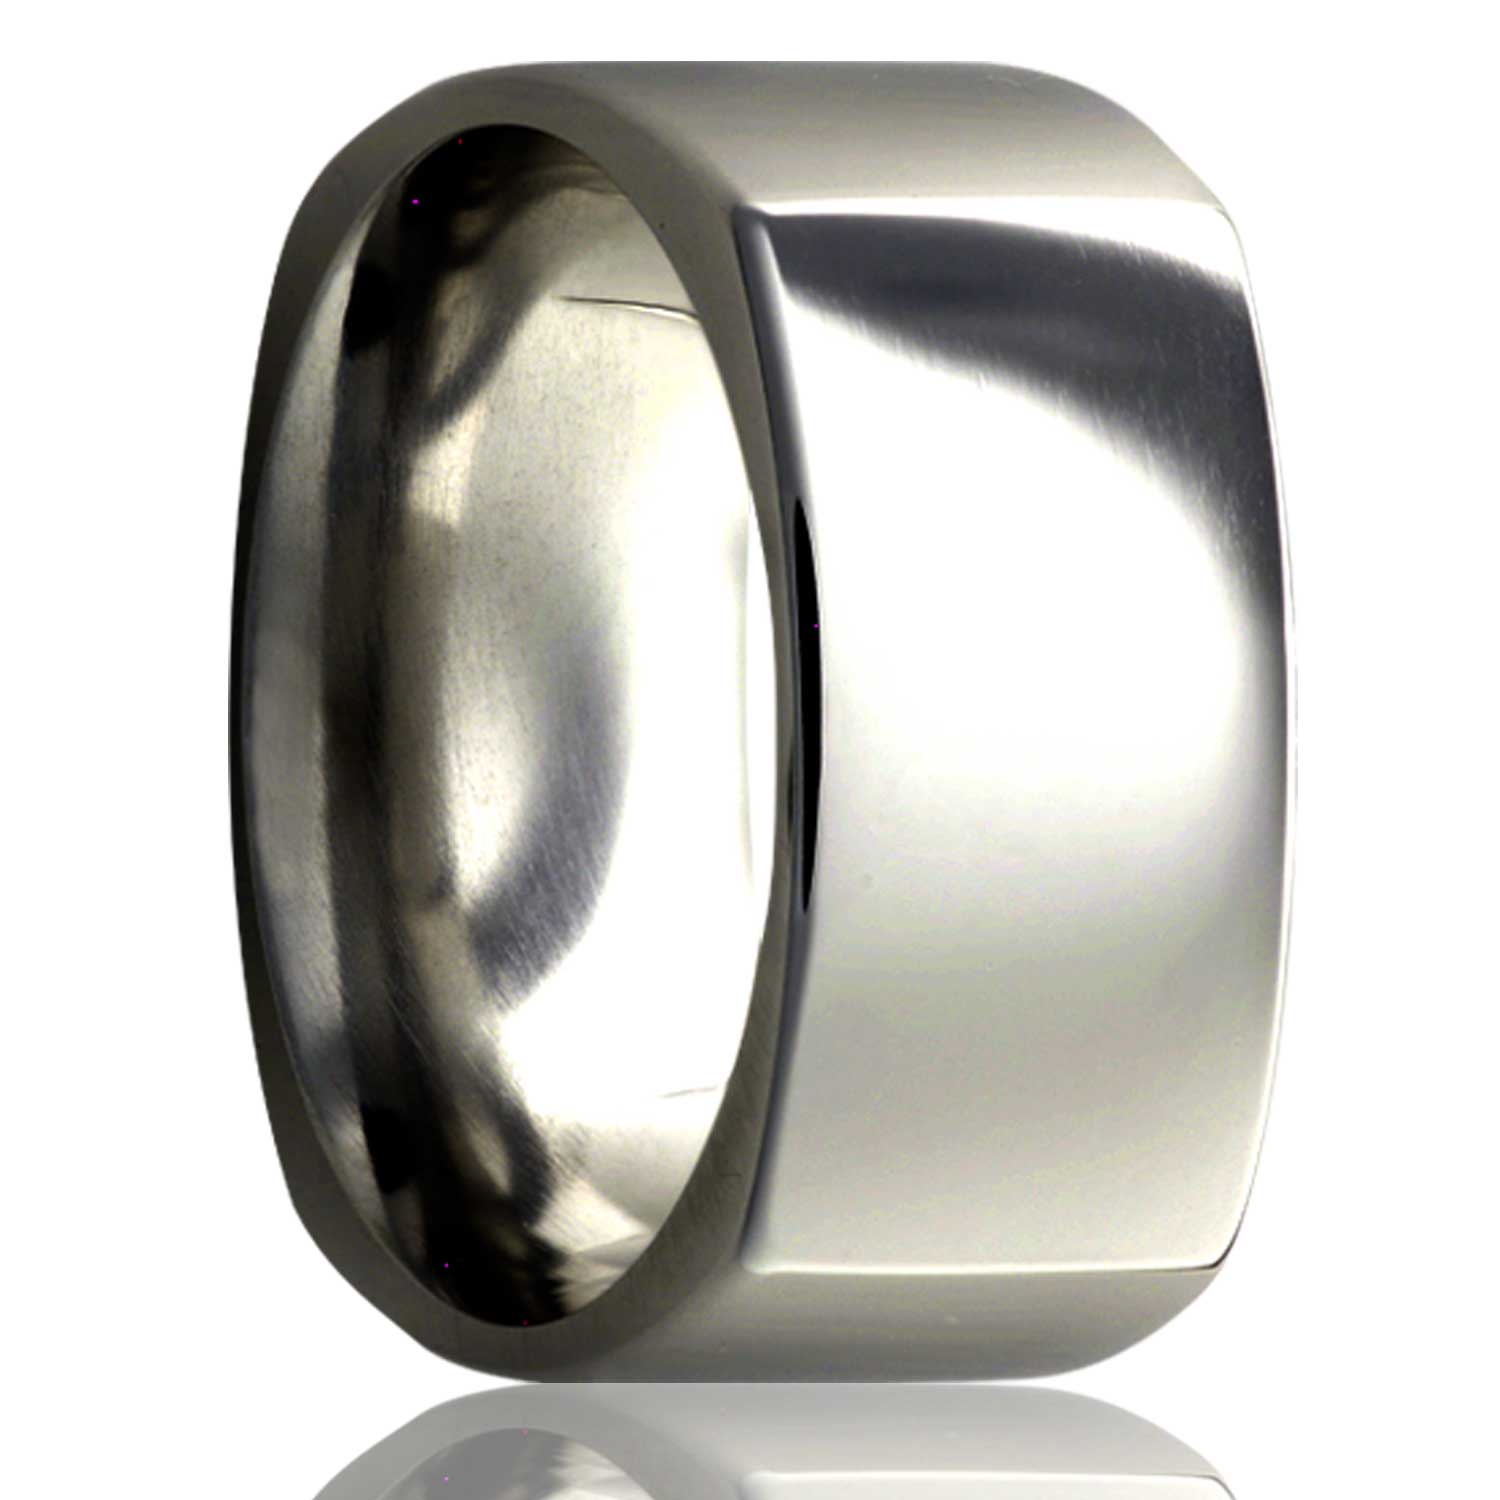 A square shaped titanium wedding band displayed on a neutral white background.